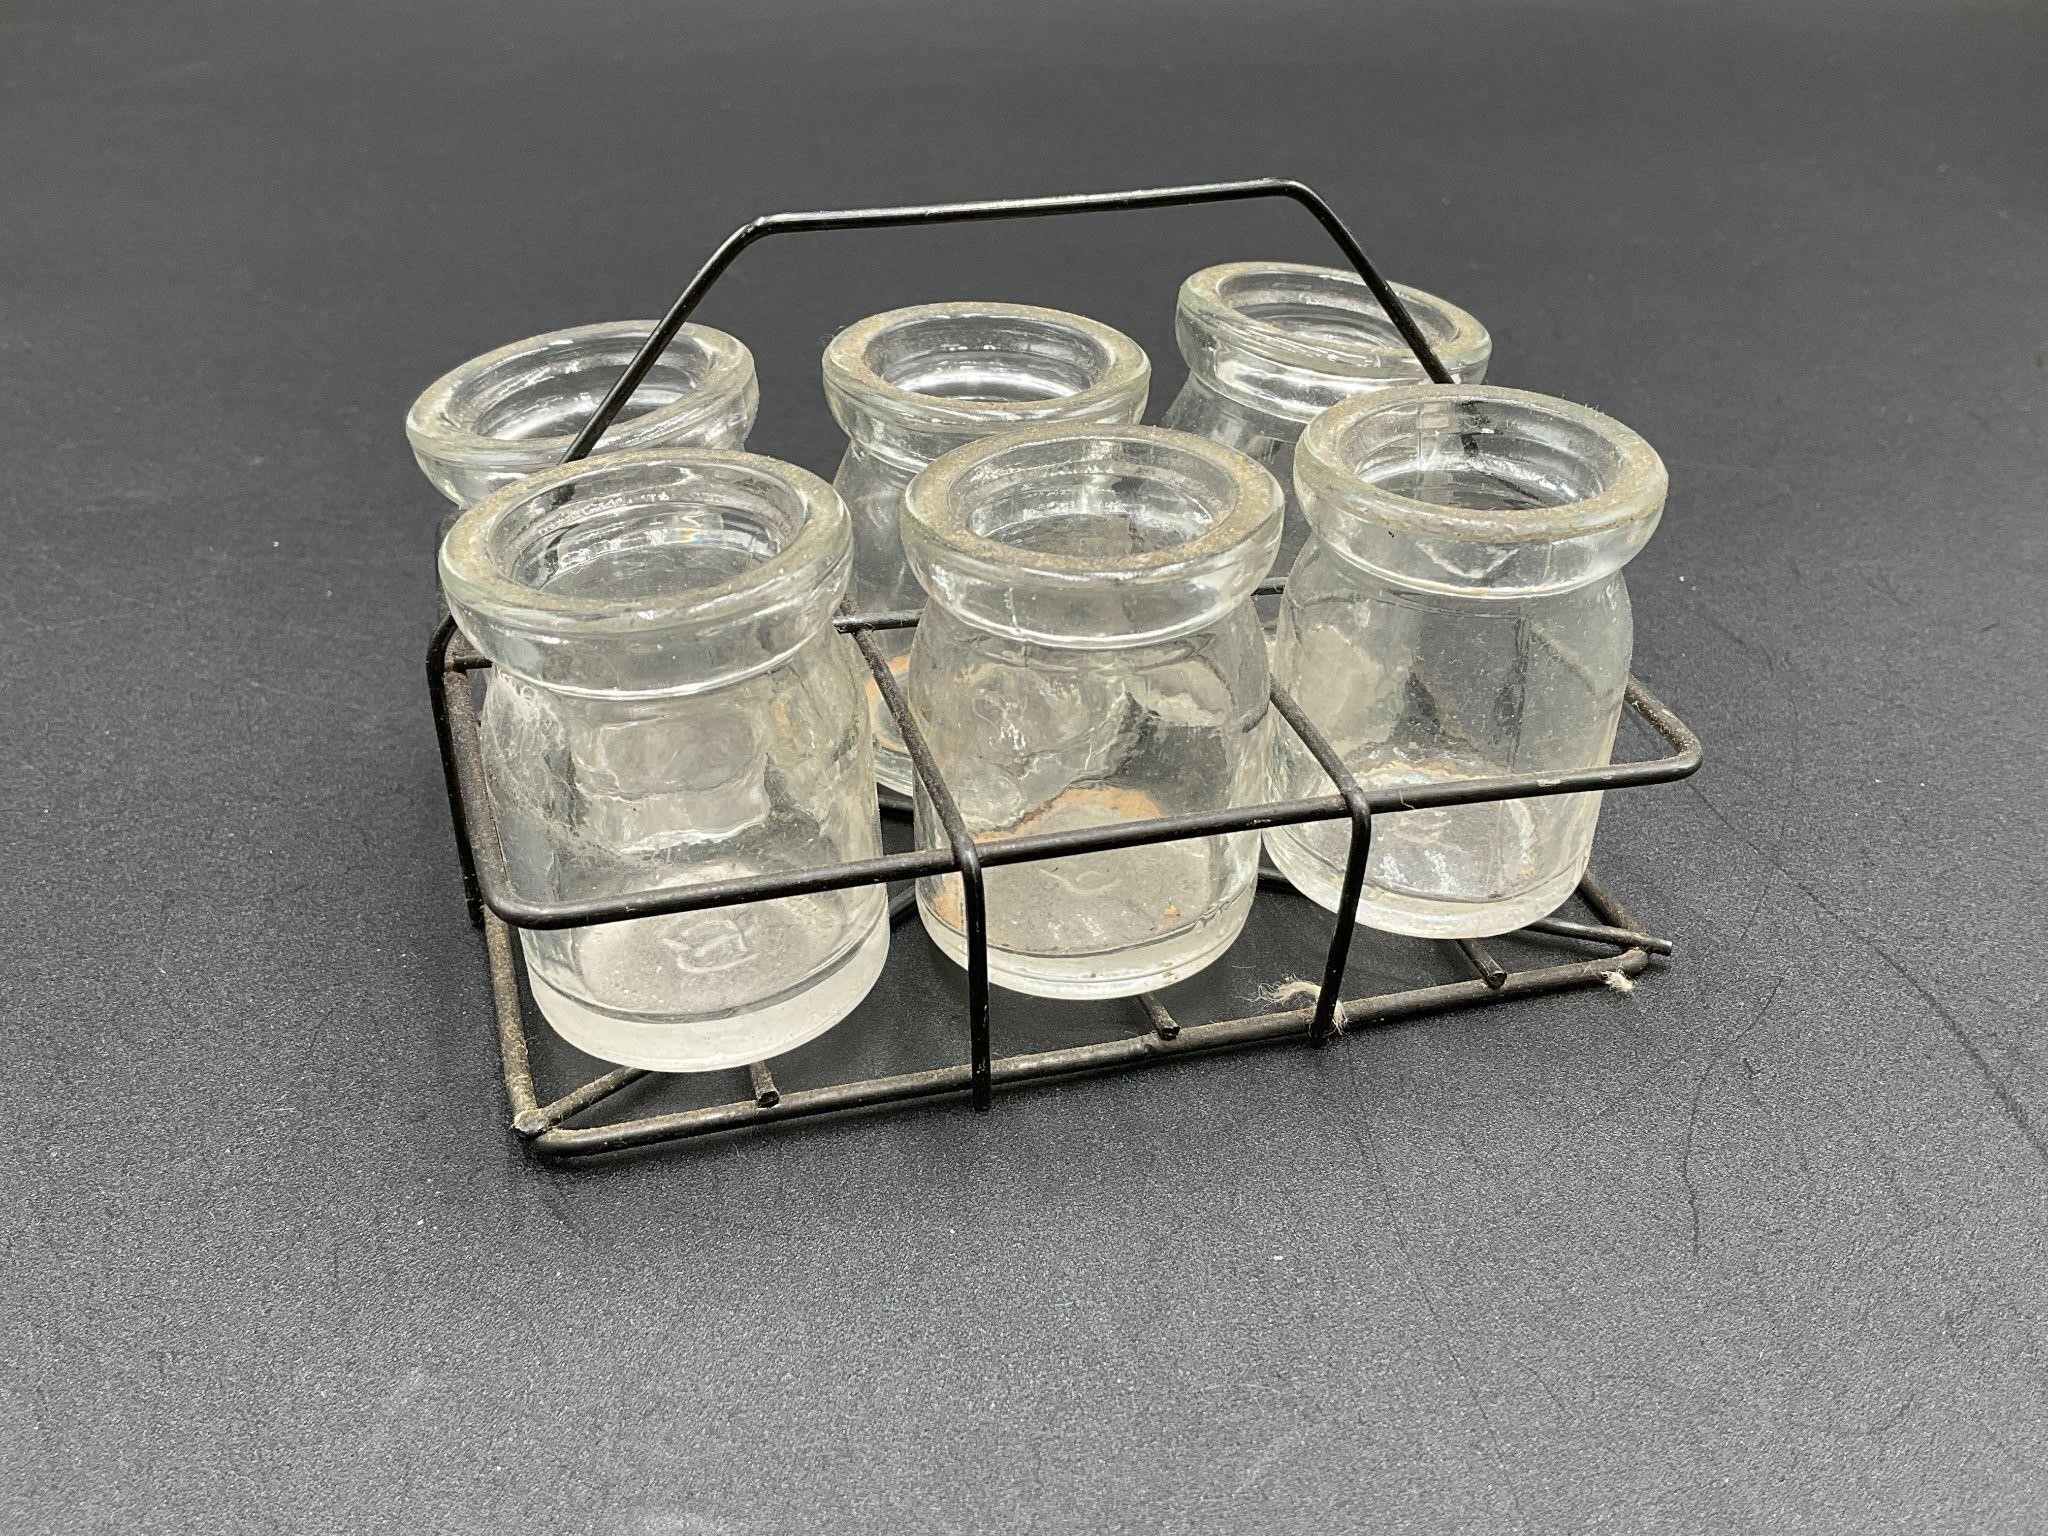 6 Mini Milk Dairy Glass Bottles With Metal Caddy